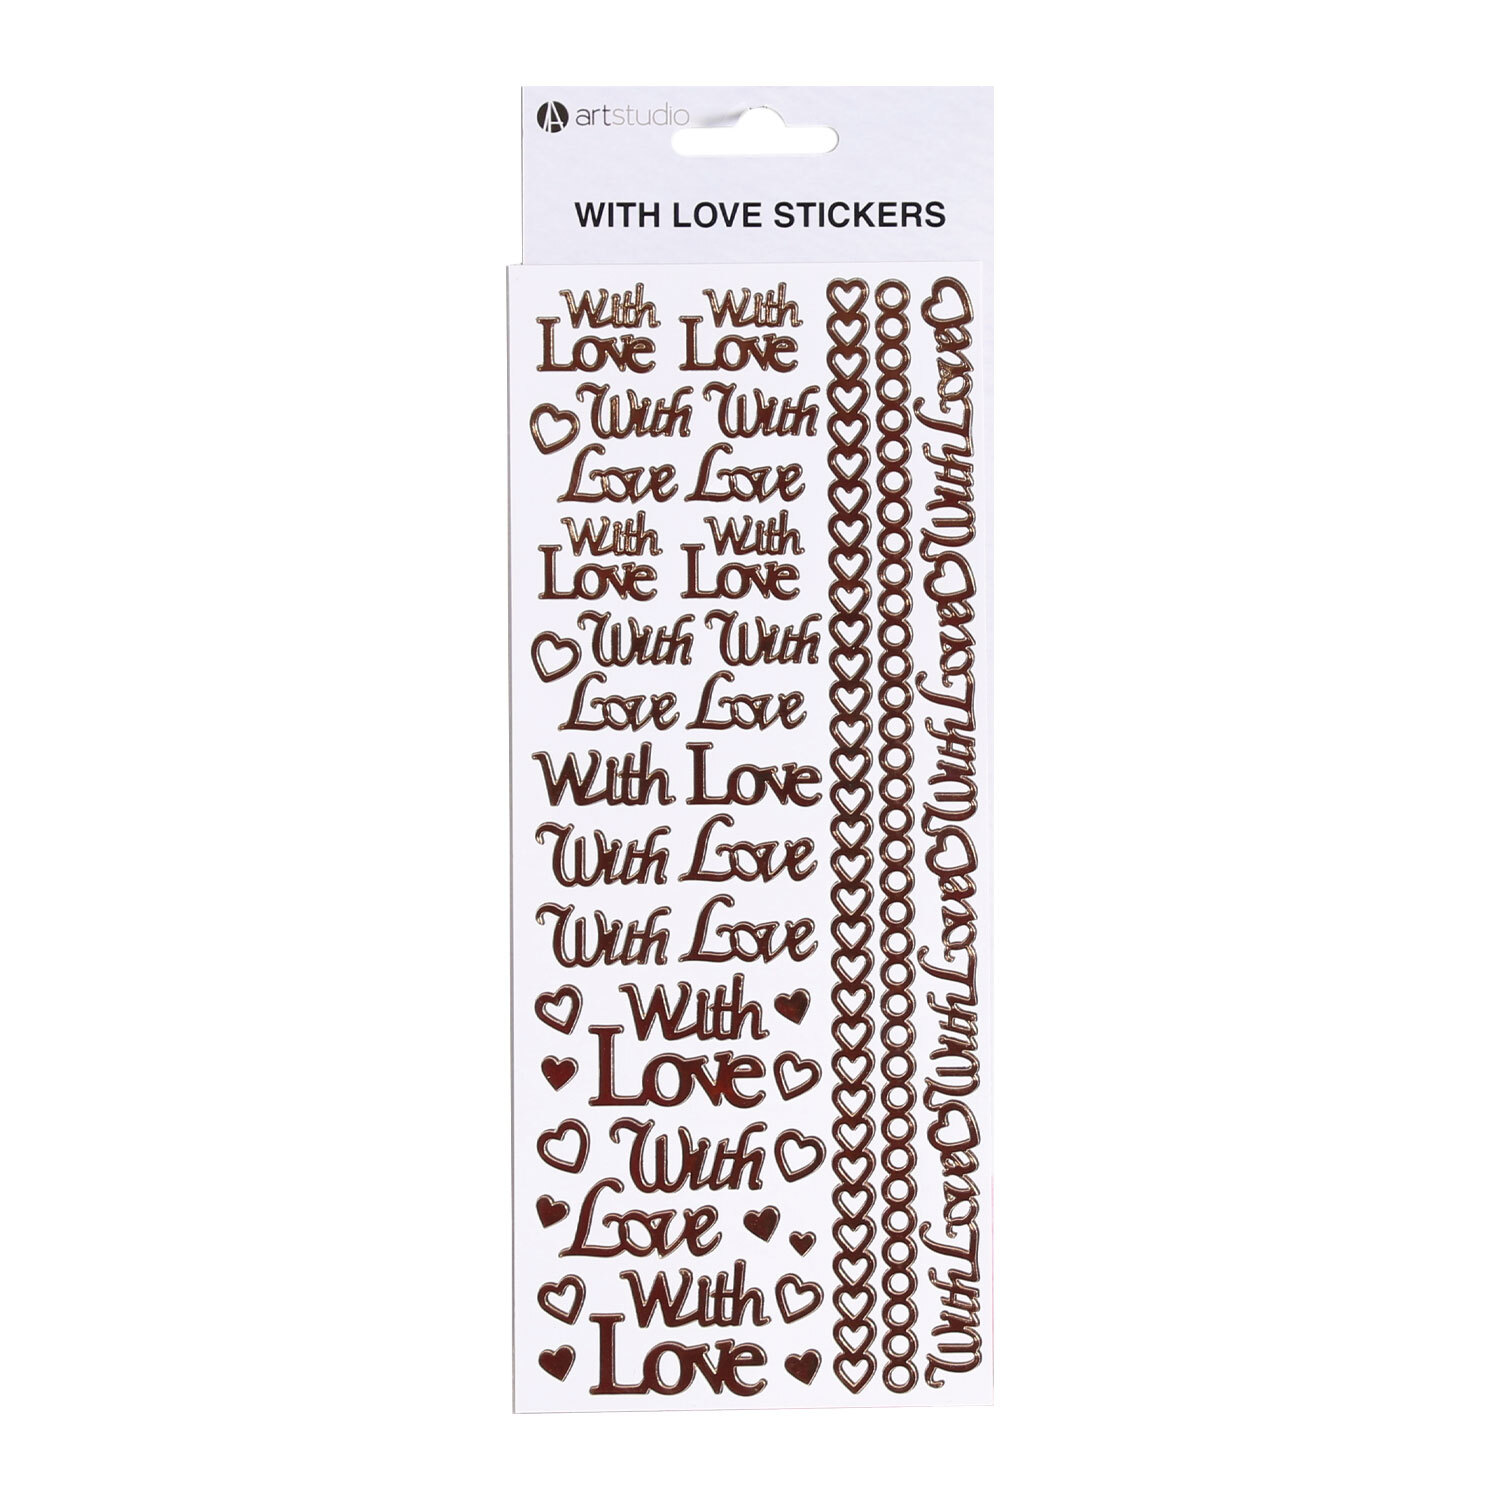 With Love Stickers Image 1